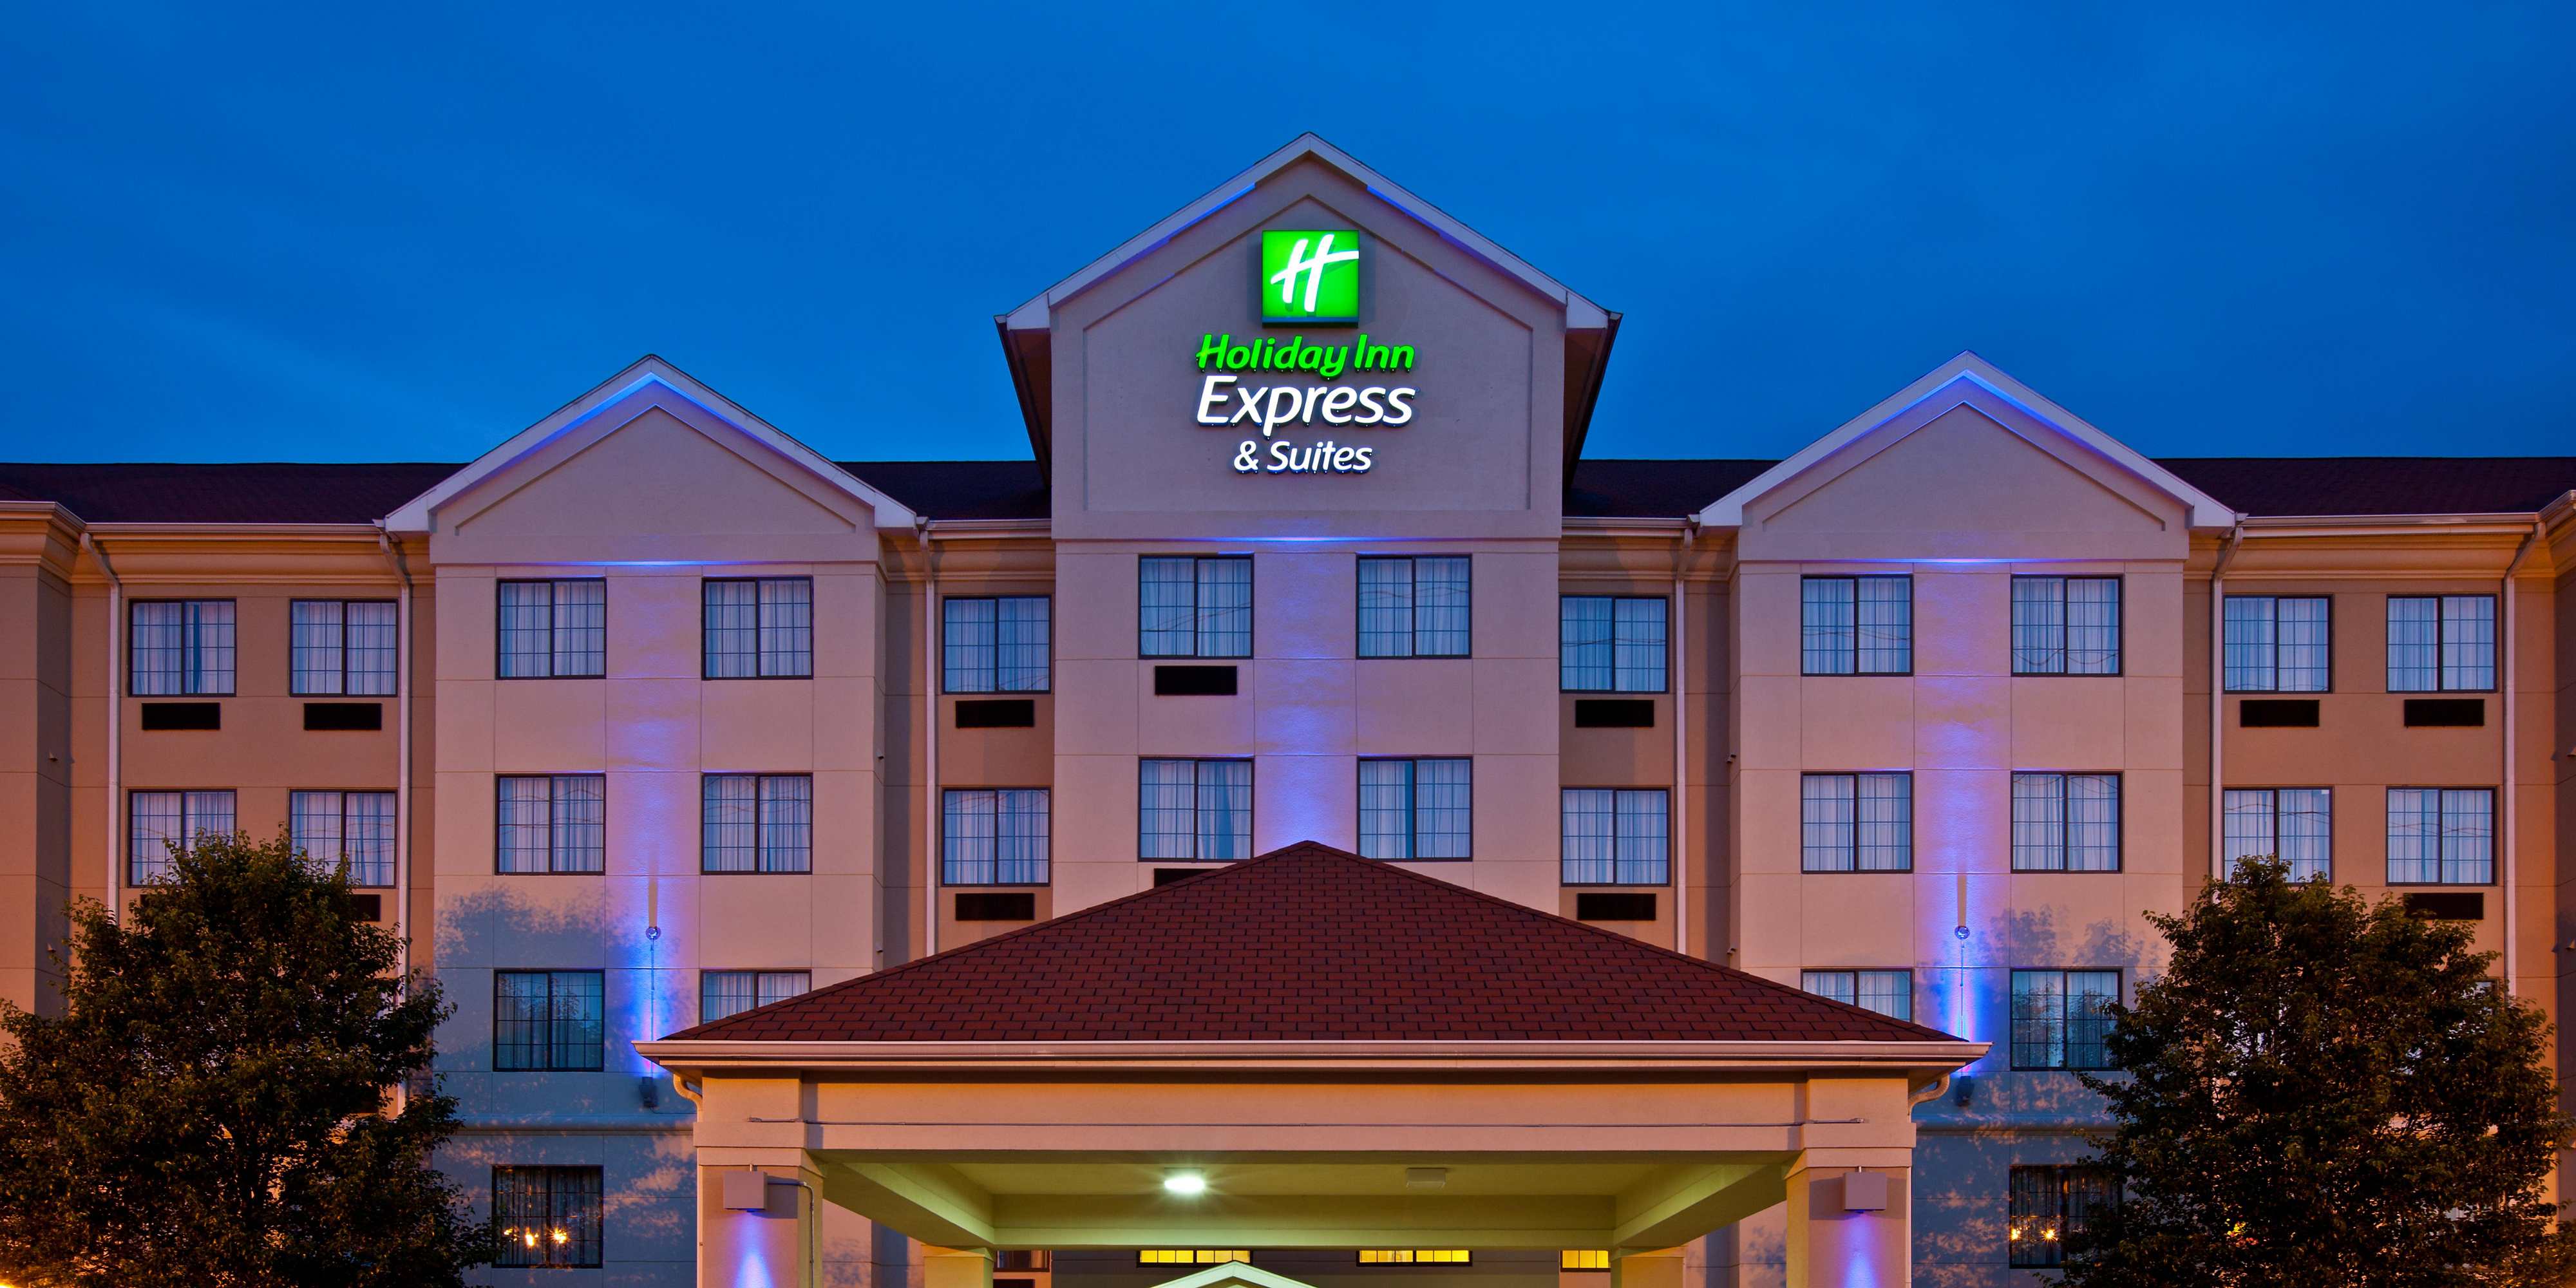 Holiday Inn Express And Suites Indianapolis 4278154202 2x1?fmt=jpg&jpegSize=500&qlt=85&resMode=sharp2&op Usm=1.75,0.3,2.0